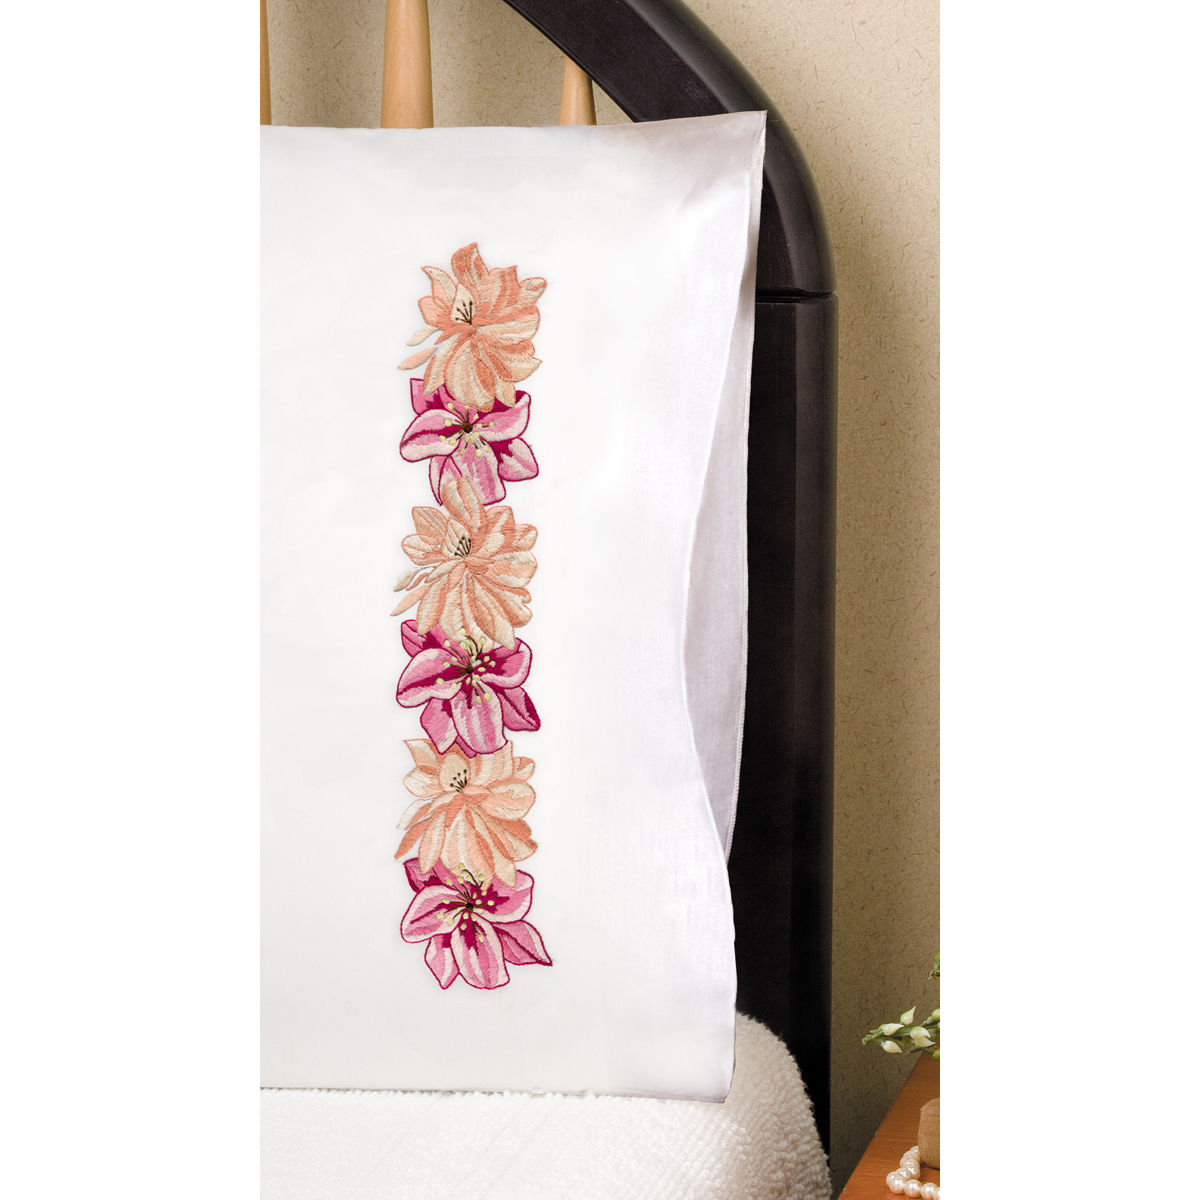 Stamped Pillowcase Pair For Embroidery 20"X30"-Pink Floral, Pk 1, Tobin - image 2 of 2